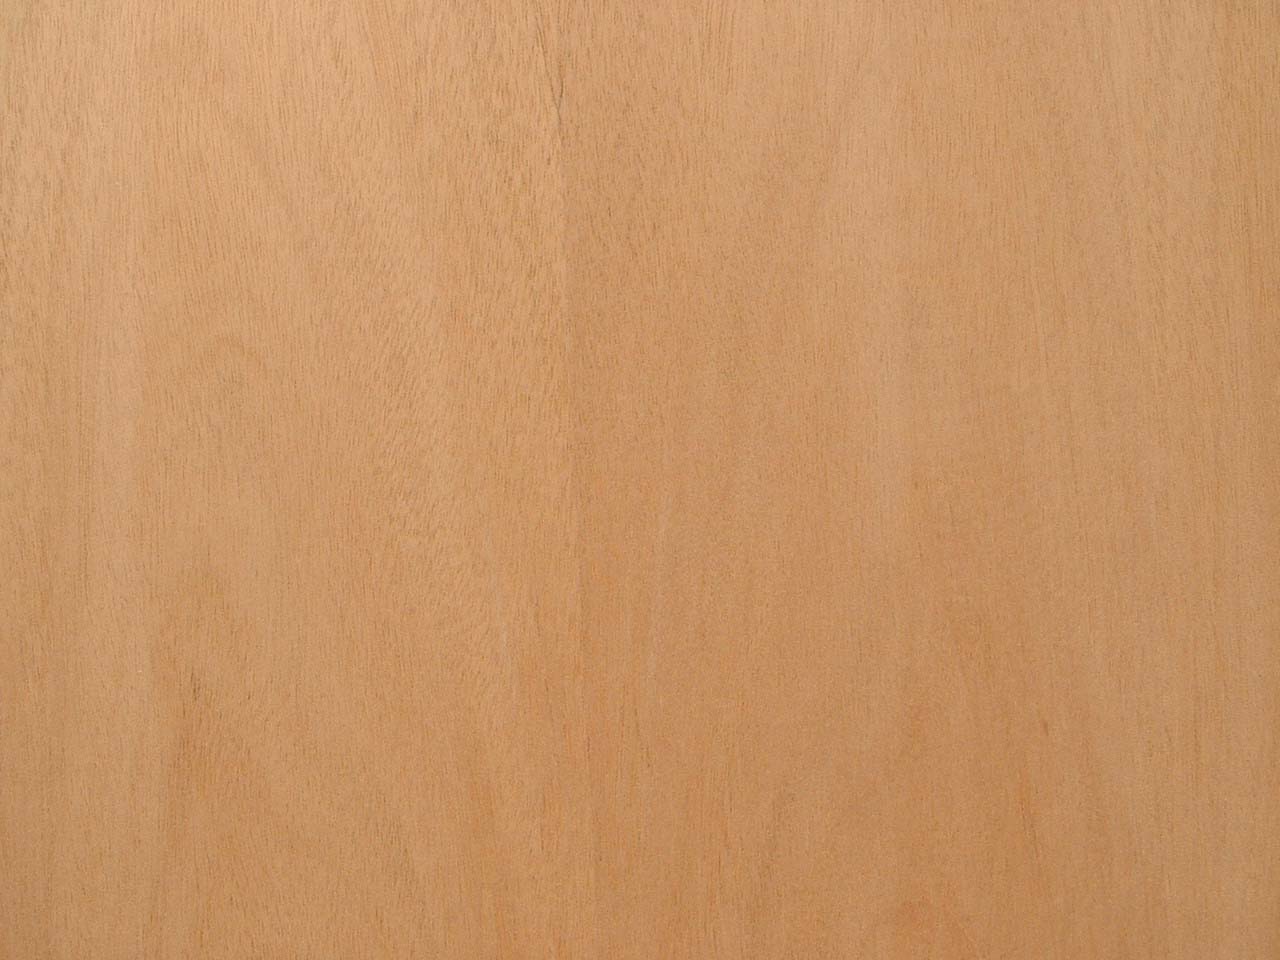 Marine Plywood BS1088 18mm Thick For wet conditions 600 x 600mm 